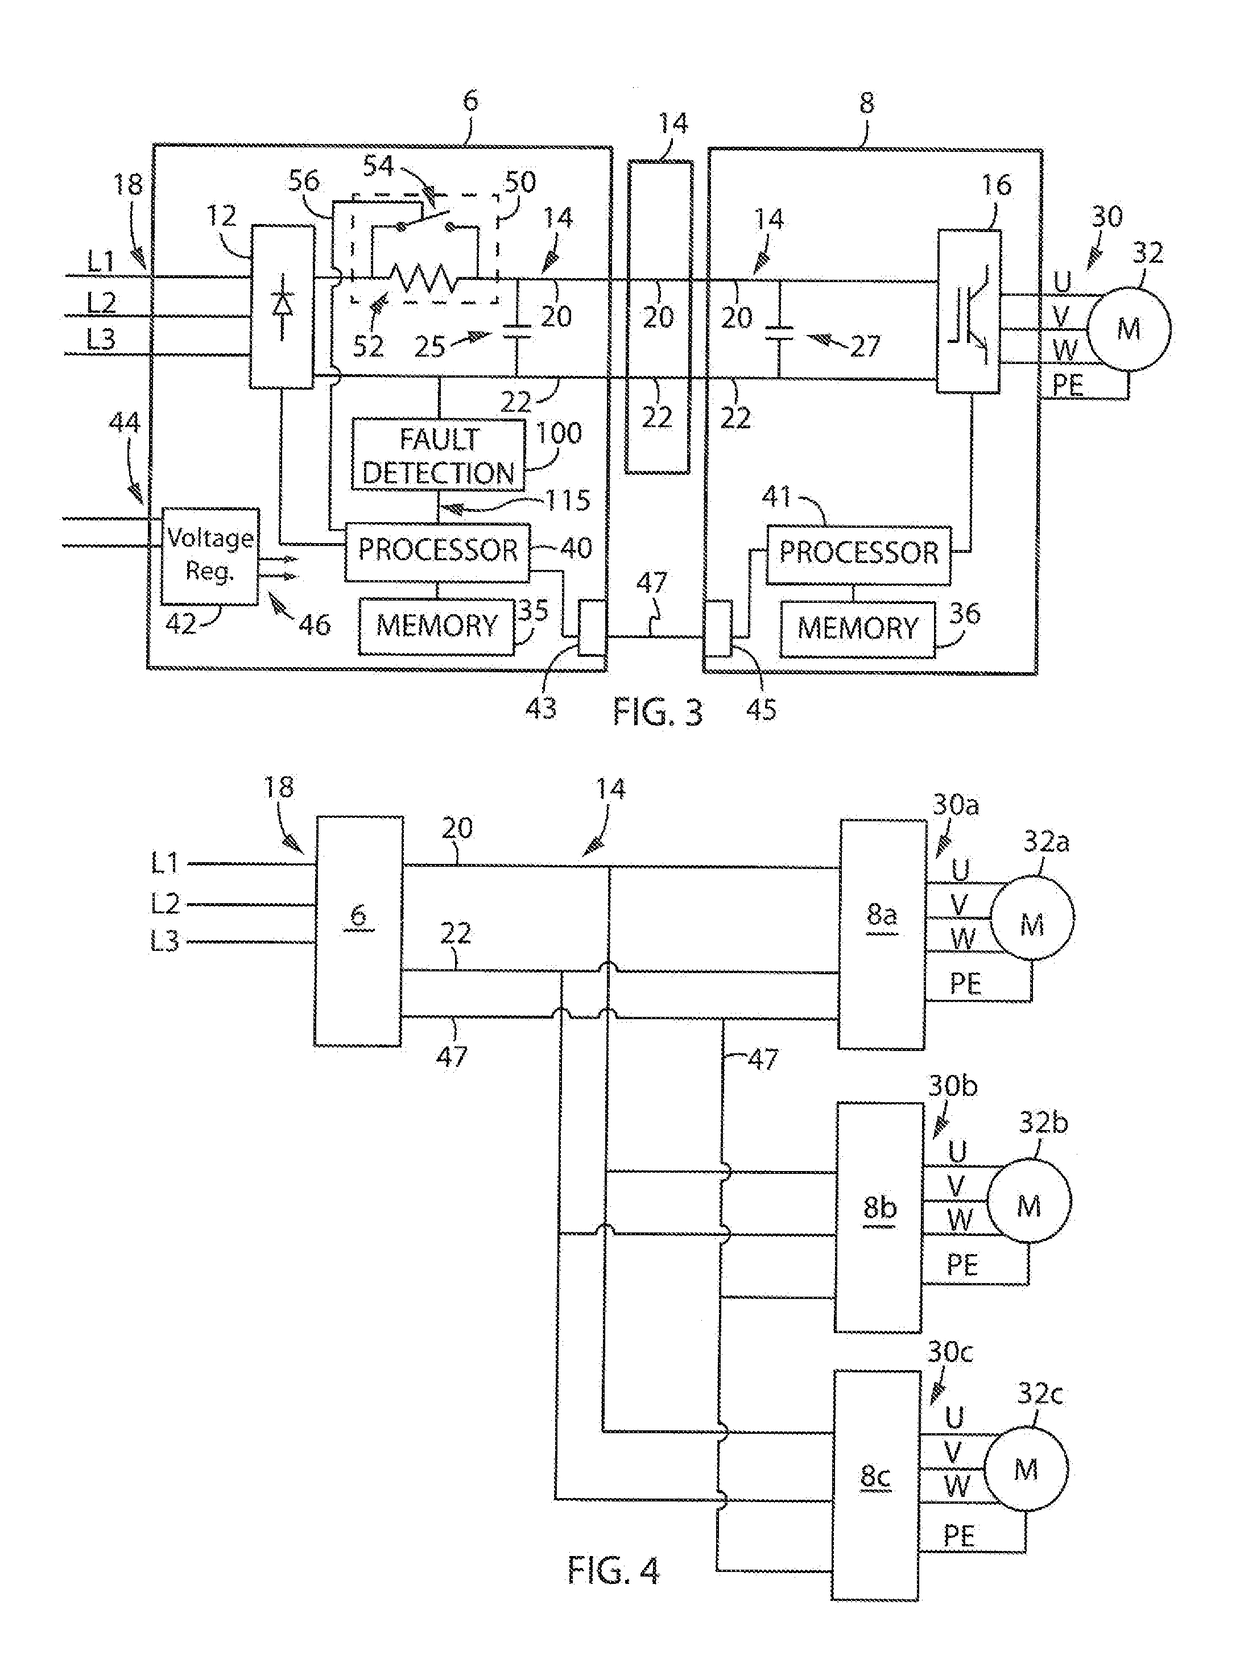 Method and apparatus for detecting ground faults in inverter outputs on a shared DC bus